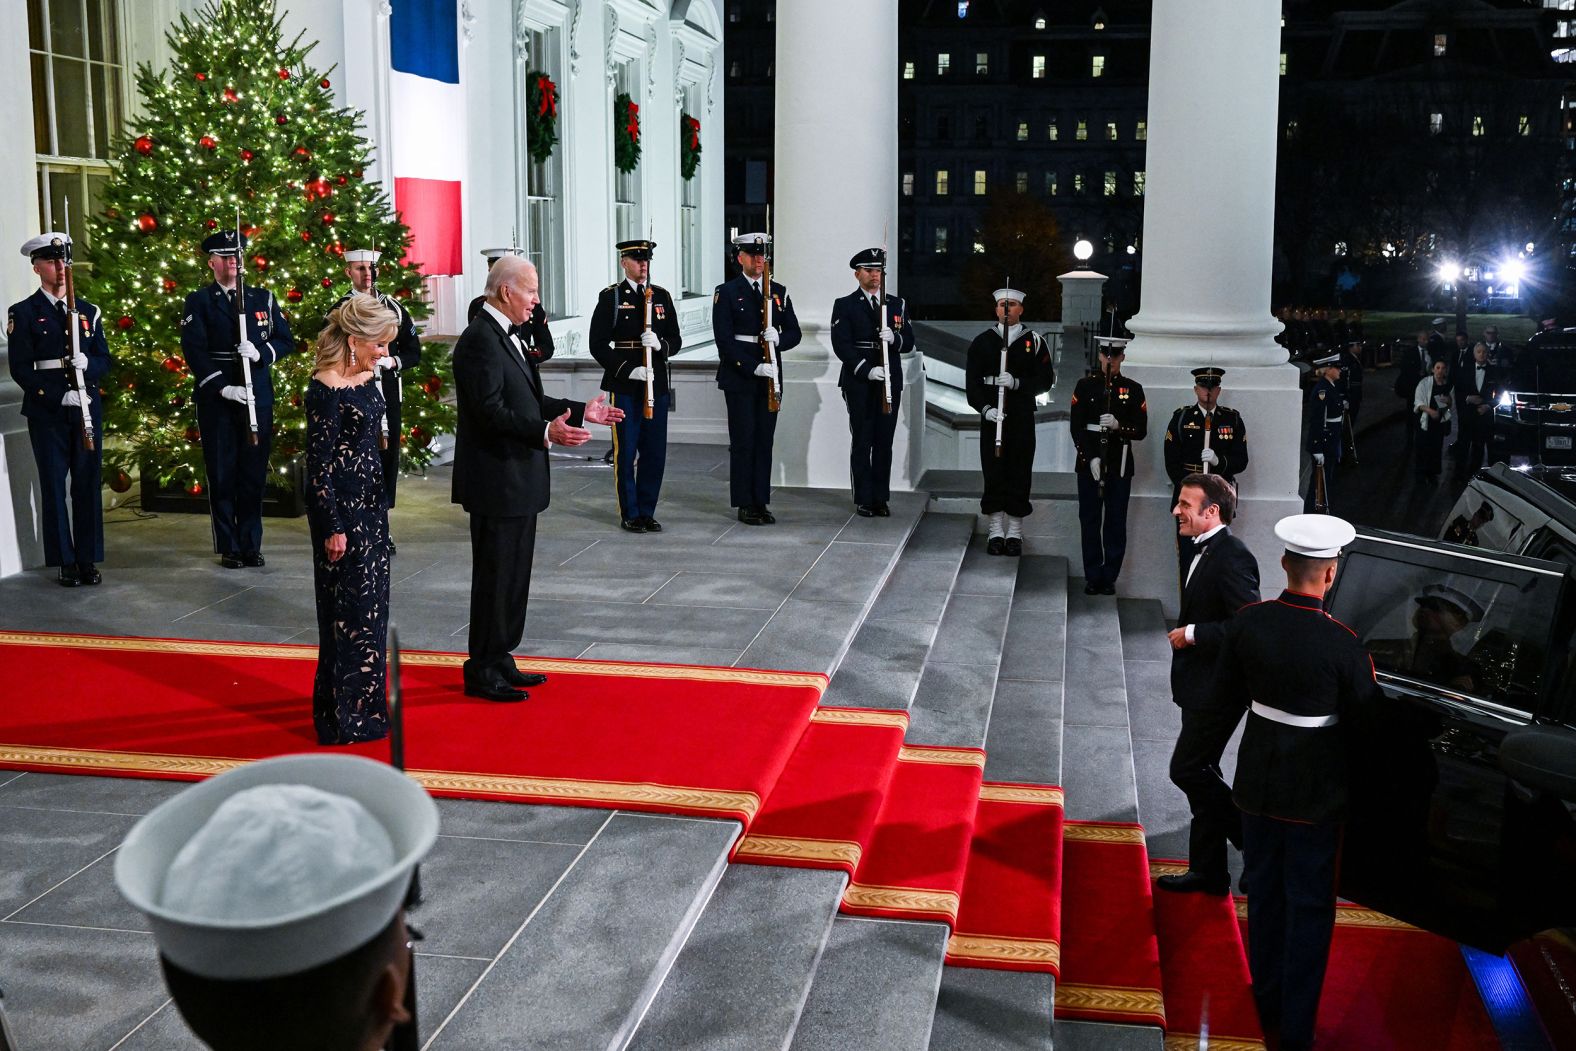 US President Joe Biden and first lady Jill Biden greet French President Emmanuel Macron and his wife, Brigitte, as they arrive for a <a href="index.php?page=&url=http%3A%2F%2Fwww.cnn.com%2F2022%2F12%2F01%2Fpolitics%2Fgallery%2Fmacron-biden-white-house-state-dinner%2Findex.html" target="_blank">state dinner</a> at the White House in December 2022. It was the first state dinner of the Biden administration, and the first since the start of the Covid-19 pandemic.